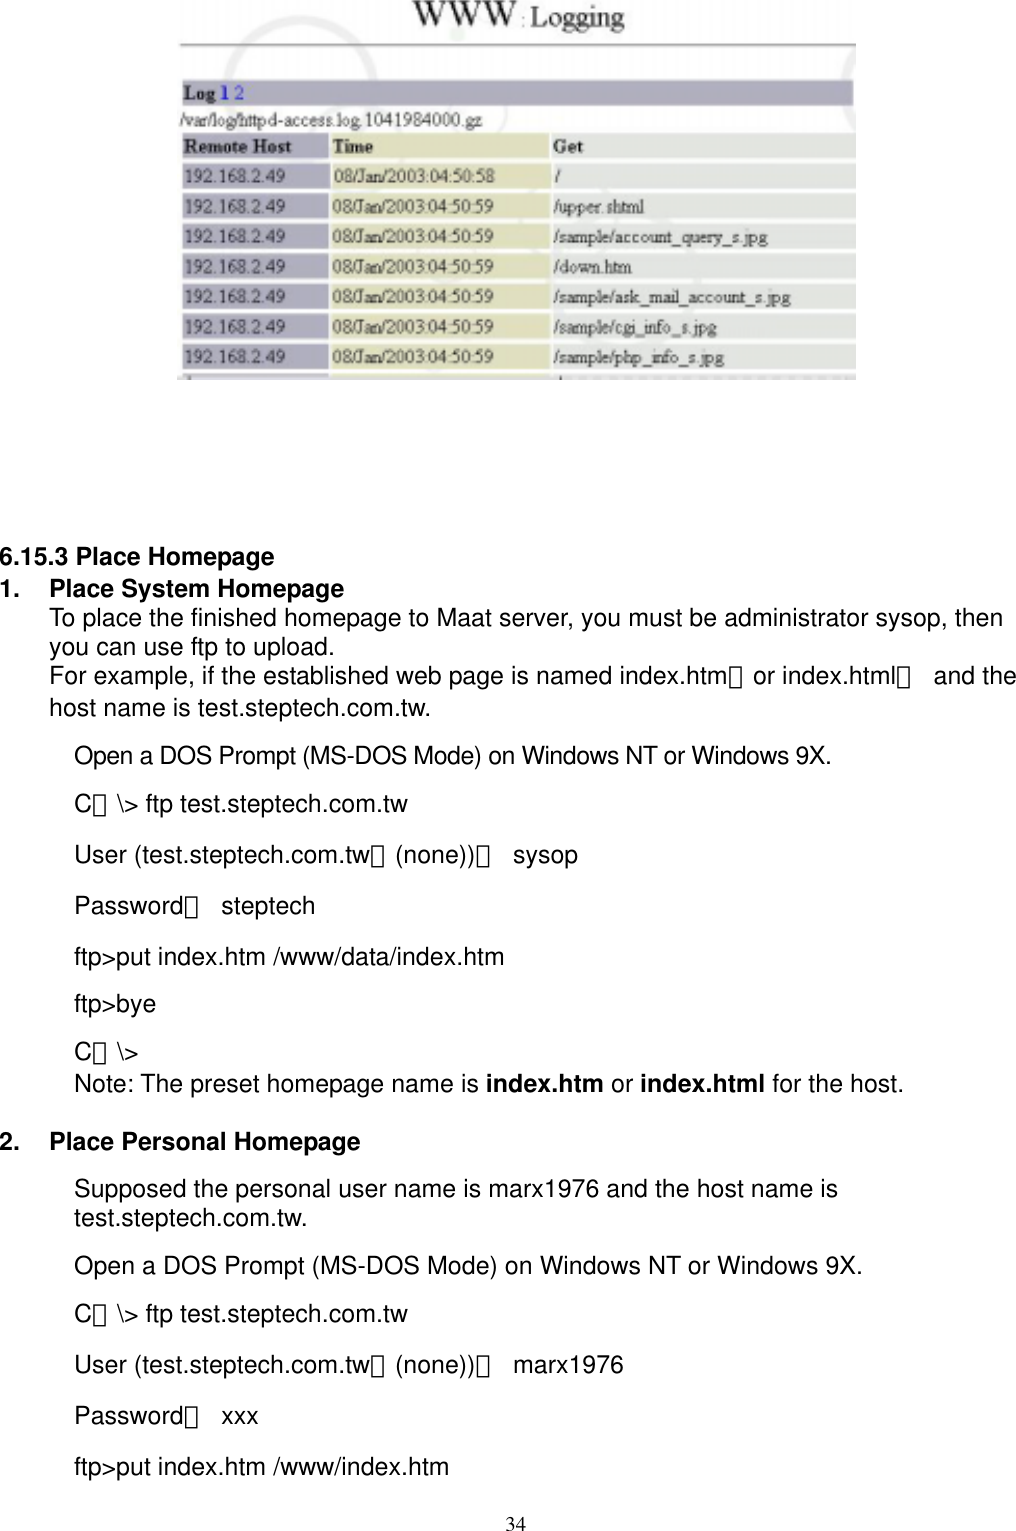  34     6.15.3 Place Homepage 1.  Place System Homepage To place the finished homepage to Maat server, you must be administrator sysop, then you can use ftp to upload.   For example, if the established web page is named index.htm（or index.html） and the host name is test.steptech.com.tw. Open a DOS Prompt (MS-DOS Mode) on Windows NT or Windows 9X. C：\&gt; ftp test.steptech.com.tw User (test.steptech.com.tw：(none))： sysop Password： steptech ftp&gt;put index.htm /www/data/index.htm ftp&gt;bye  C：\&gt; Note: The preset homepage name is index.htm or index.html for the host.    2.  Place Personal Homepage Supposed the personal user name is marx1976 and the host name is test.steptech.com.tw. Open a DOS Prompt (MS-DOS Mode) on Windows NT or Windows 9X. C：\&gt; ftp test.steptech.com.tw User (test.steptech.com.tw：(none))： marx1976 Password： xxx ftp&gt;put index.htm /www/index.htm 